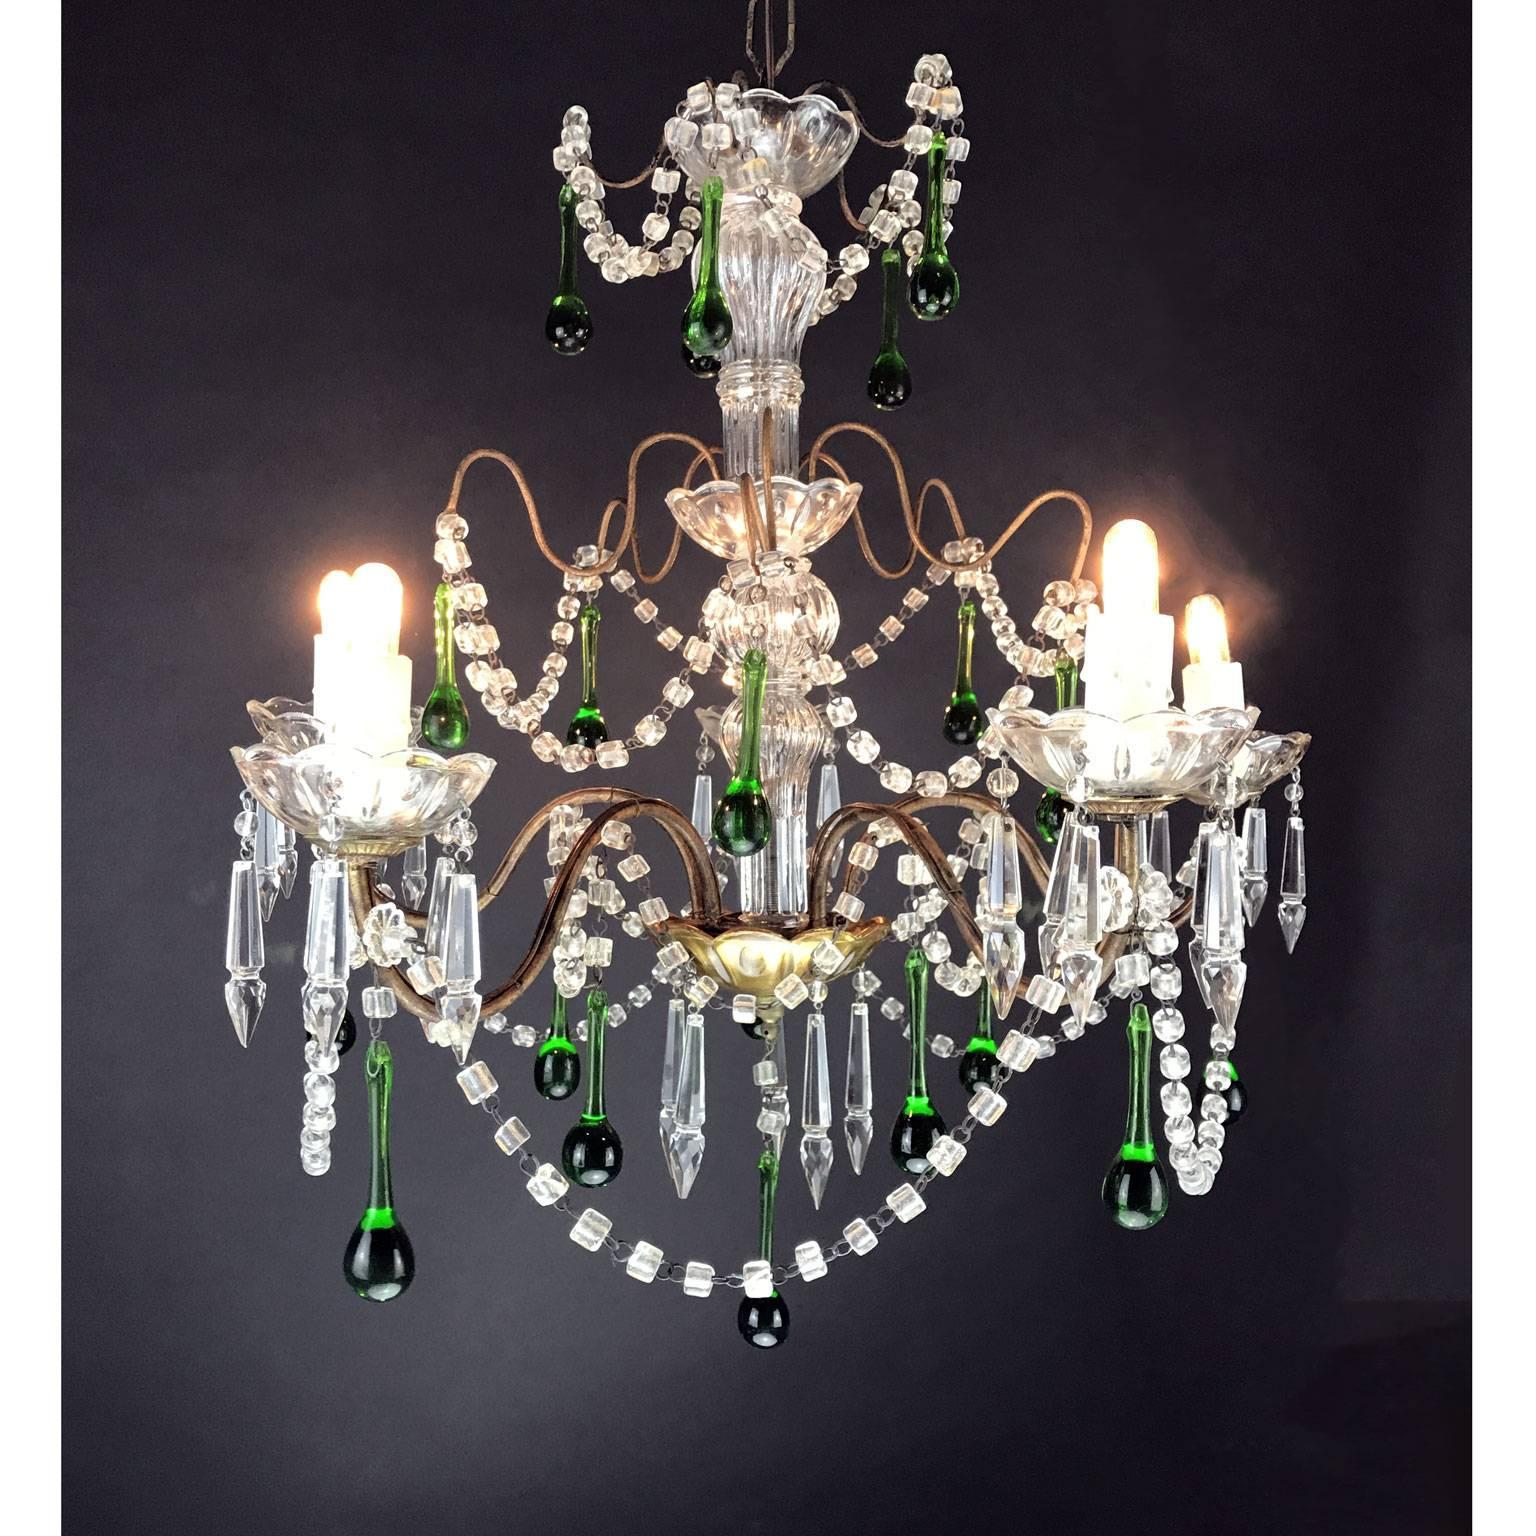 Italian five-light chandelier with a gilded brass frame with glass elements covering entire center support stem, five curved arms ending with etched glass bobeches, decorated with clear crystal beaded swags and green crystal drops. 
Good conditions,